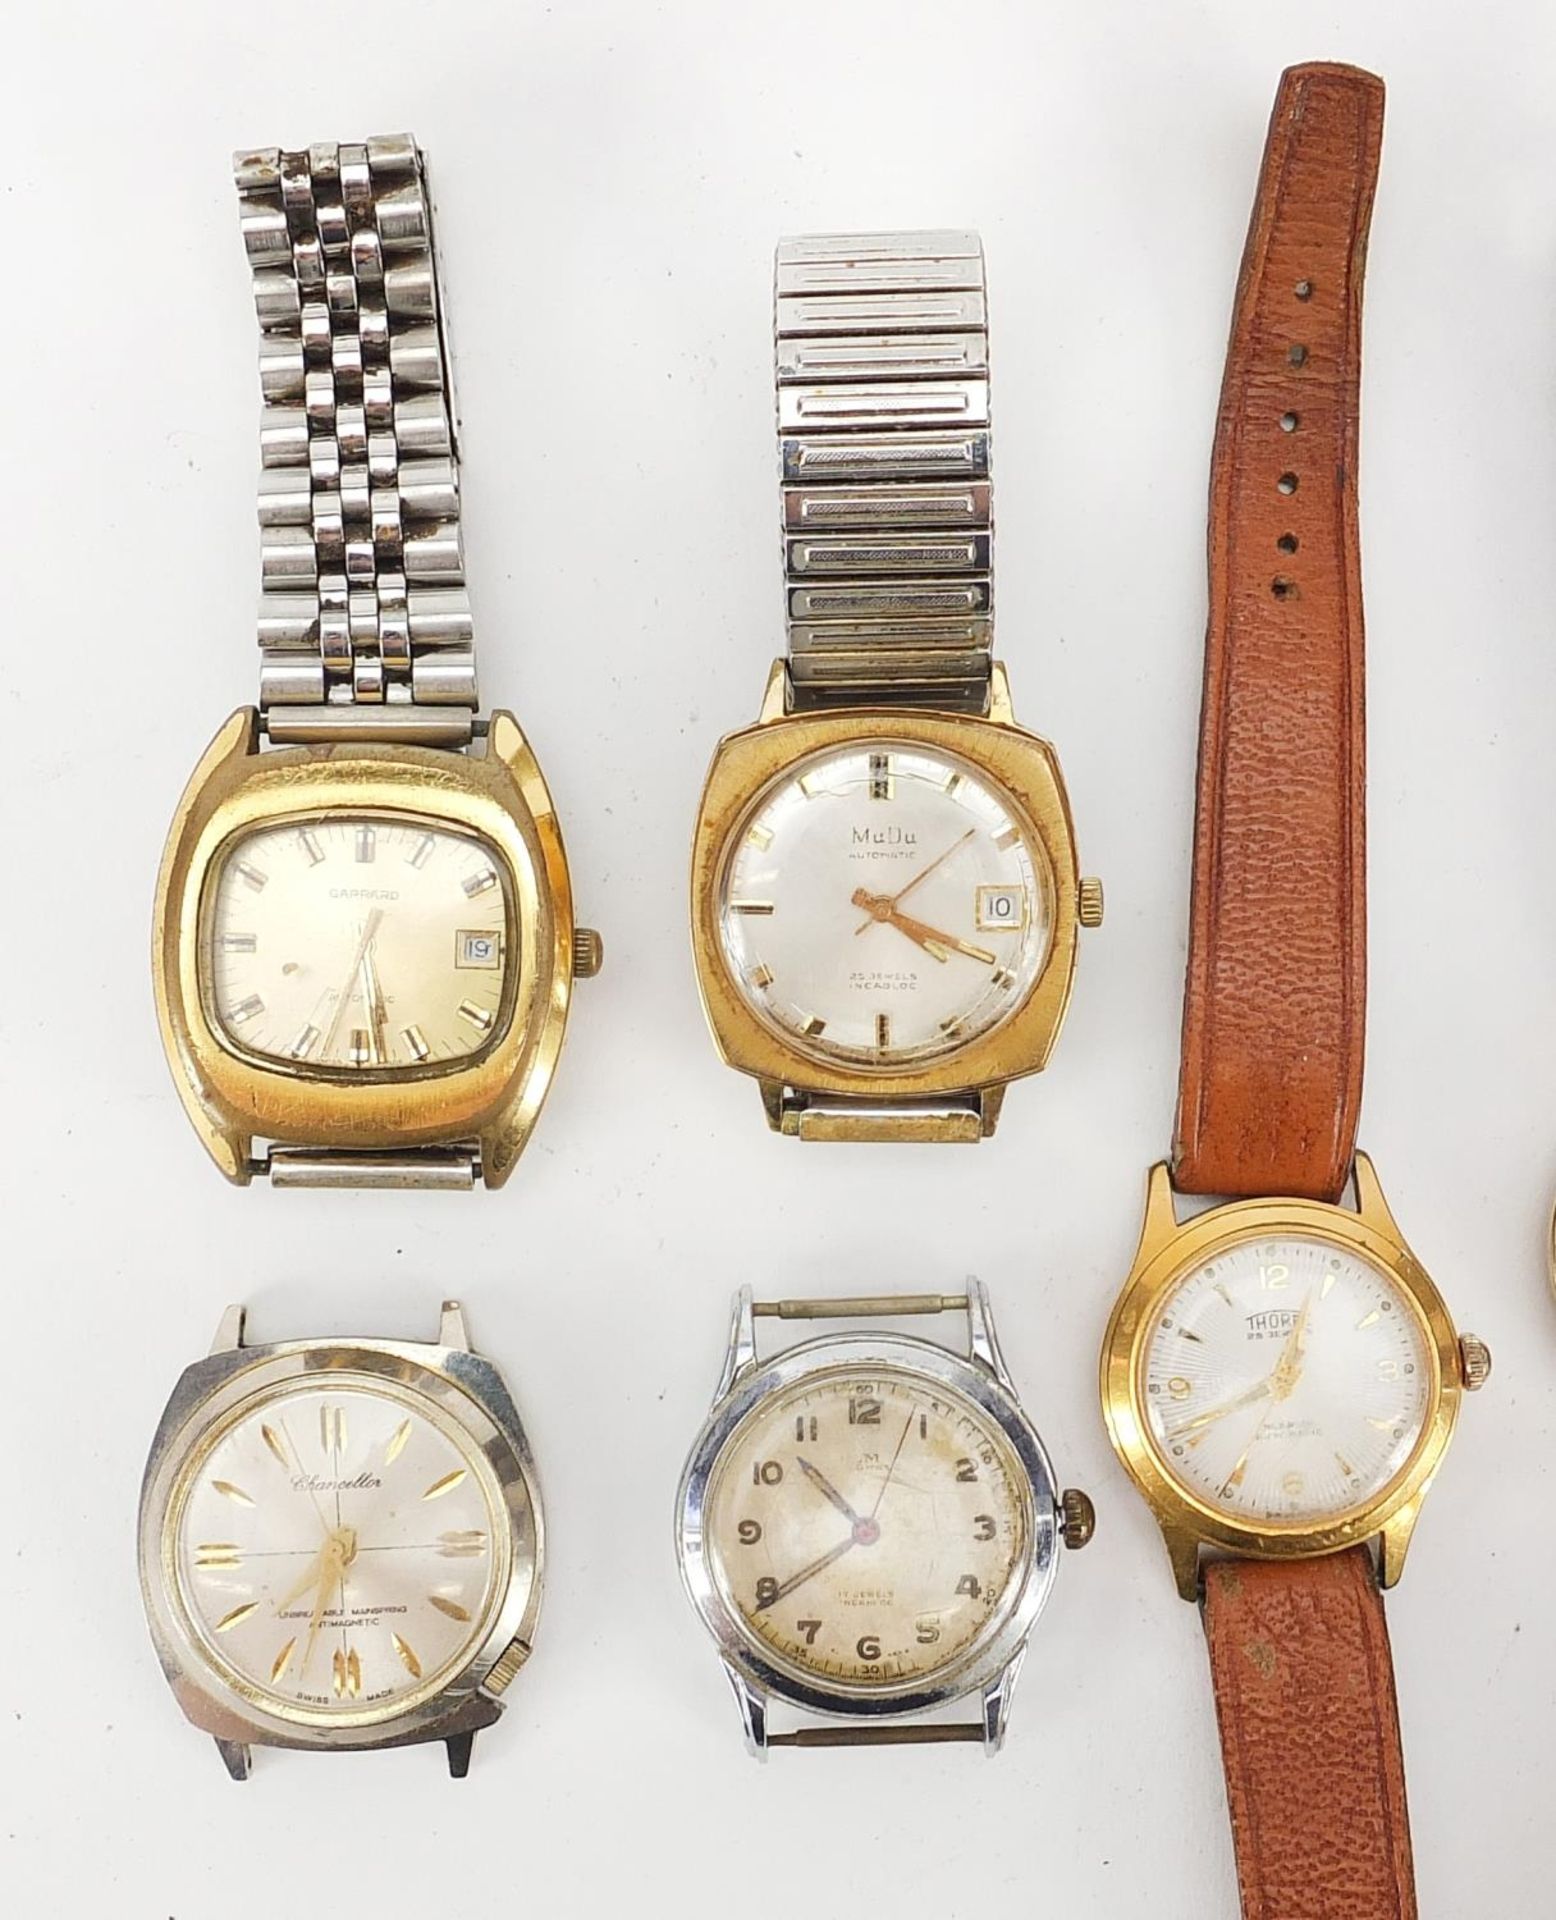 Six vintage gentlemen's wristwatches including Thorne Automatic, Garrard Automatic and Mudu - Image 2 of 5